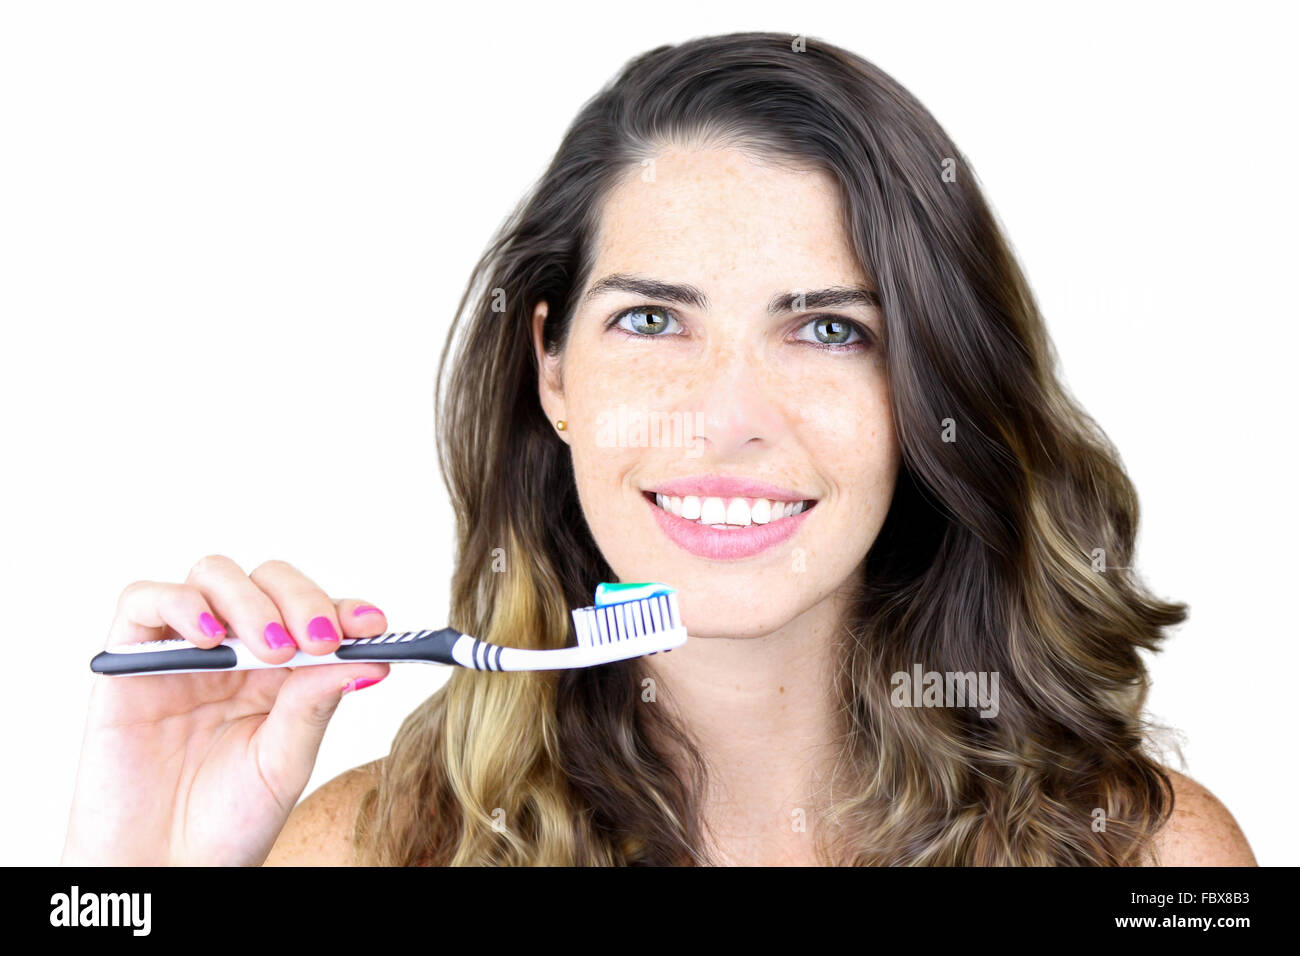 She's all about dental hygiene Stock Photo